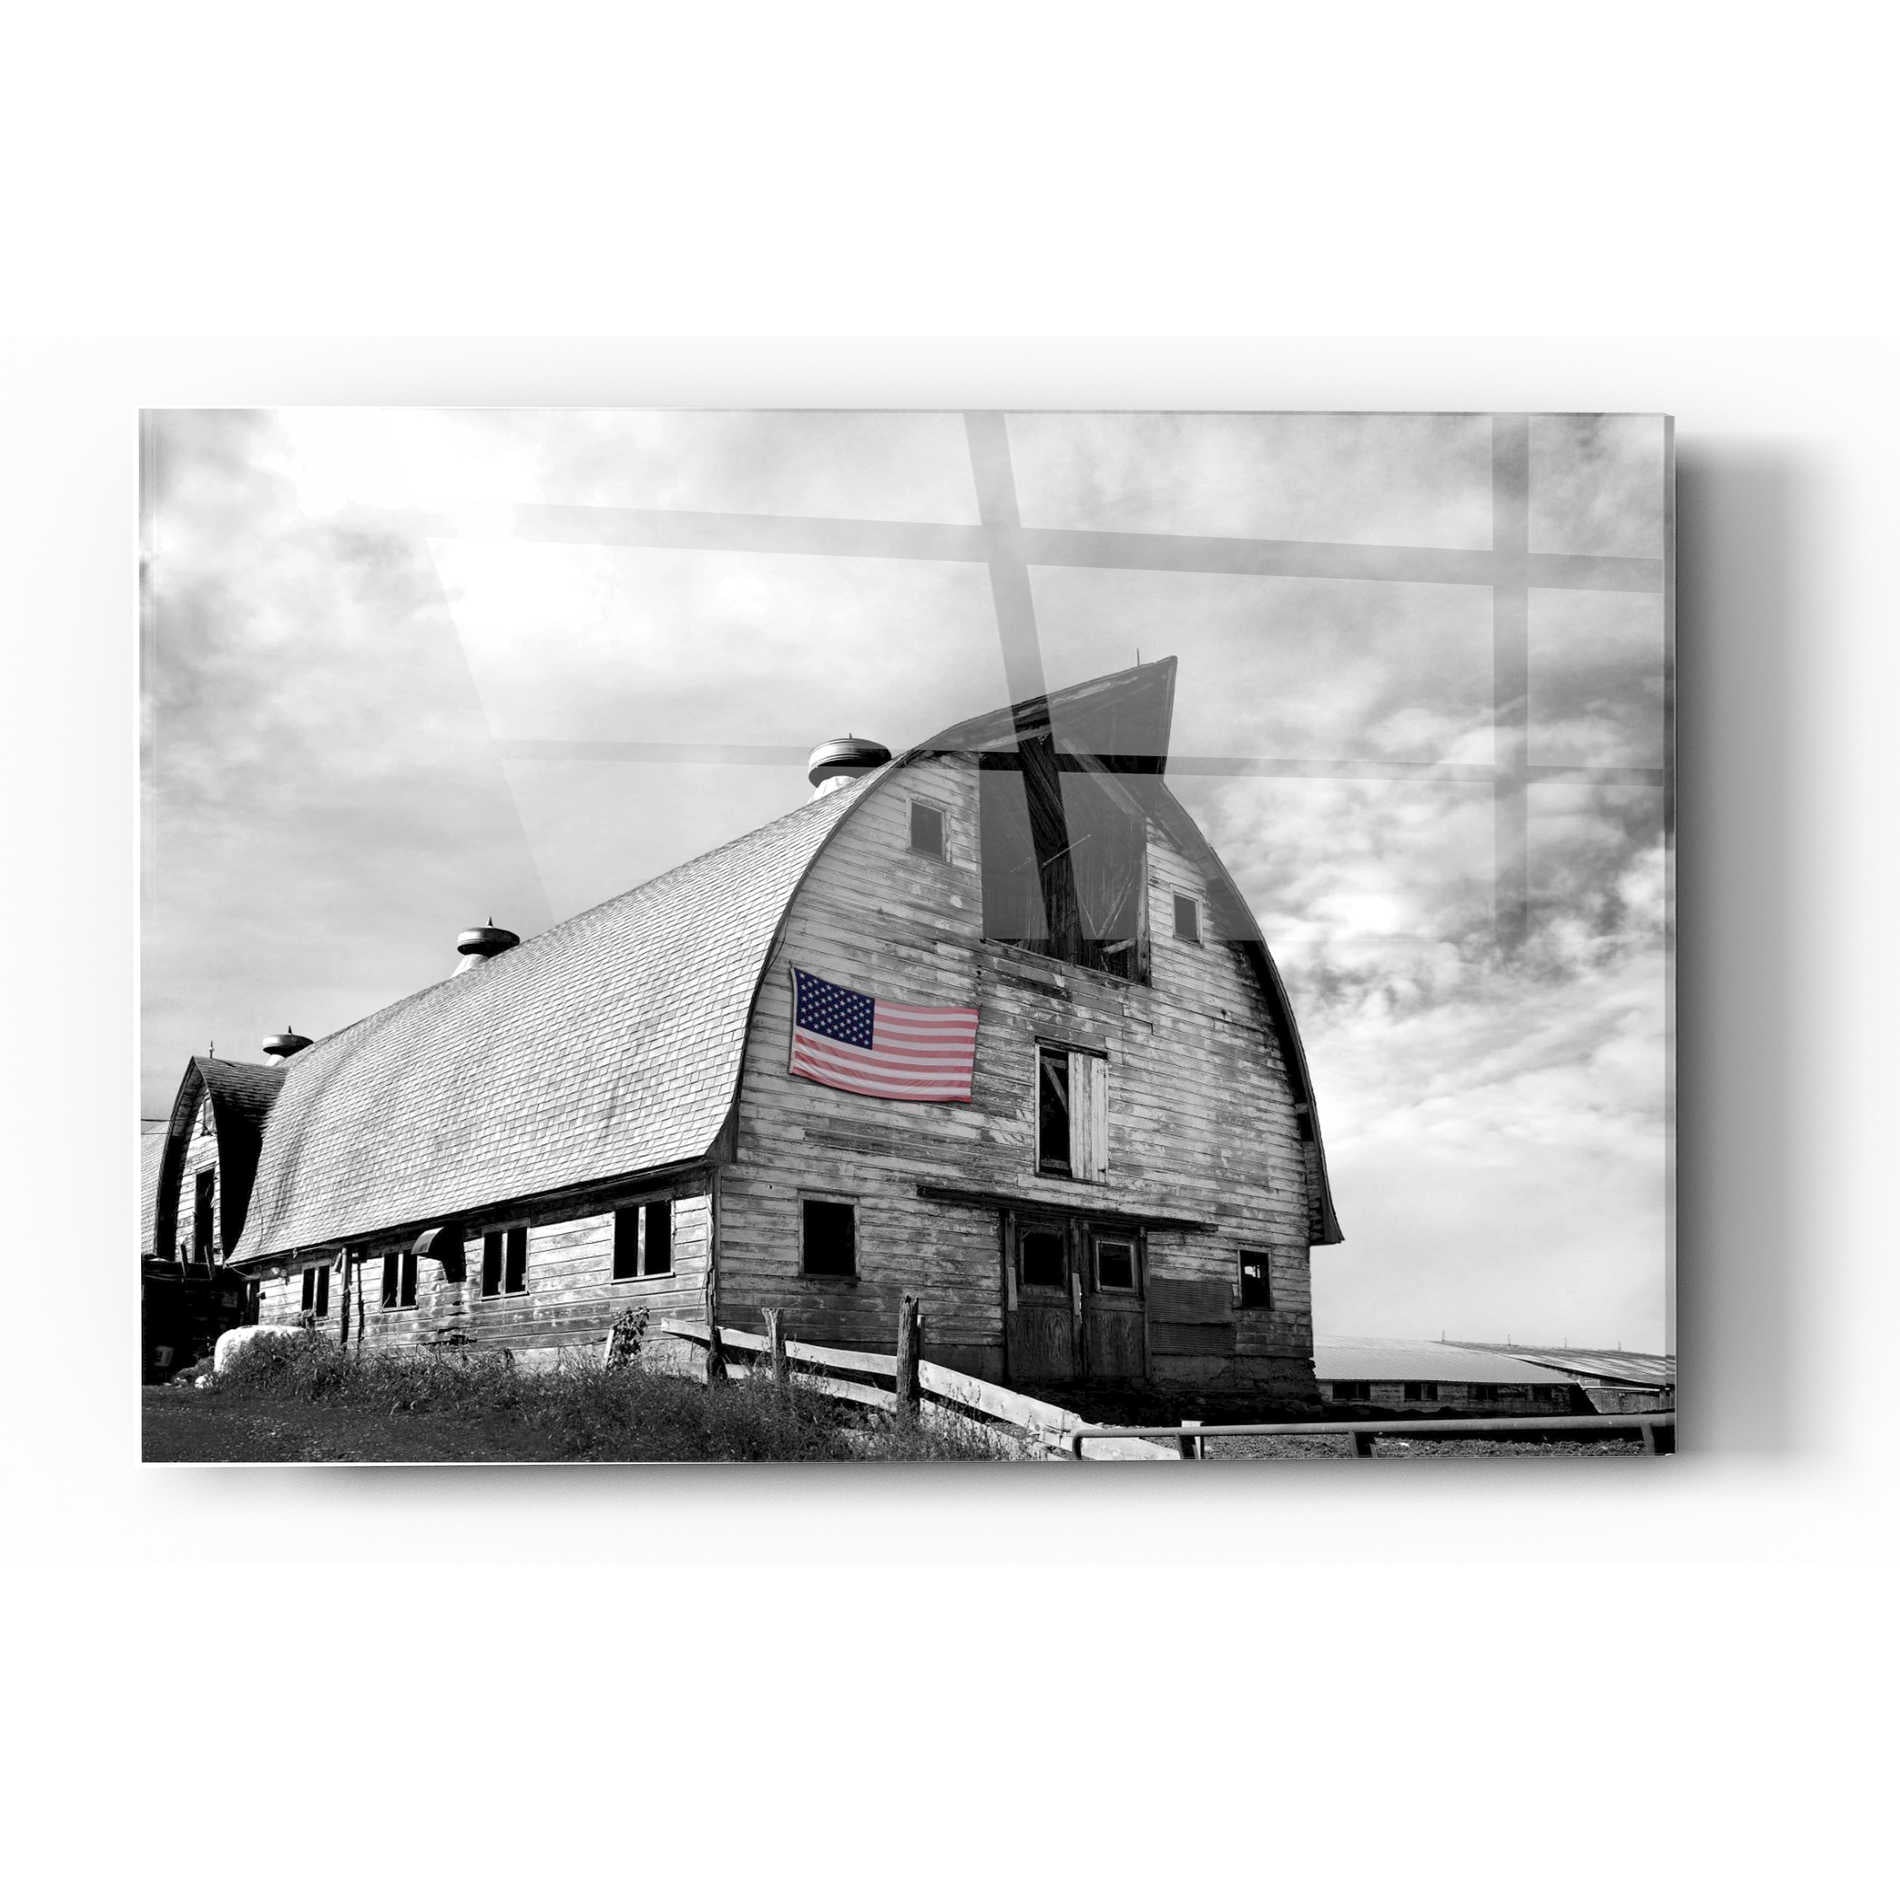 Epic Art 'Flags of Our Farmers X' by James McLoughlin Acrylic Glass Wall Art,12x16